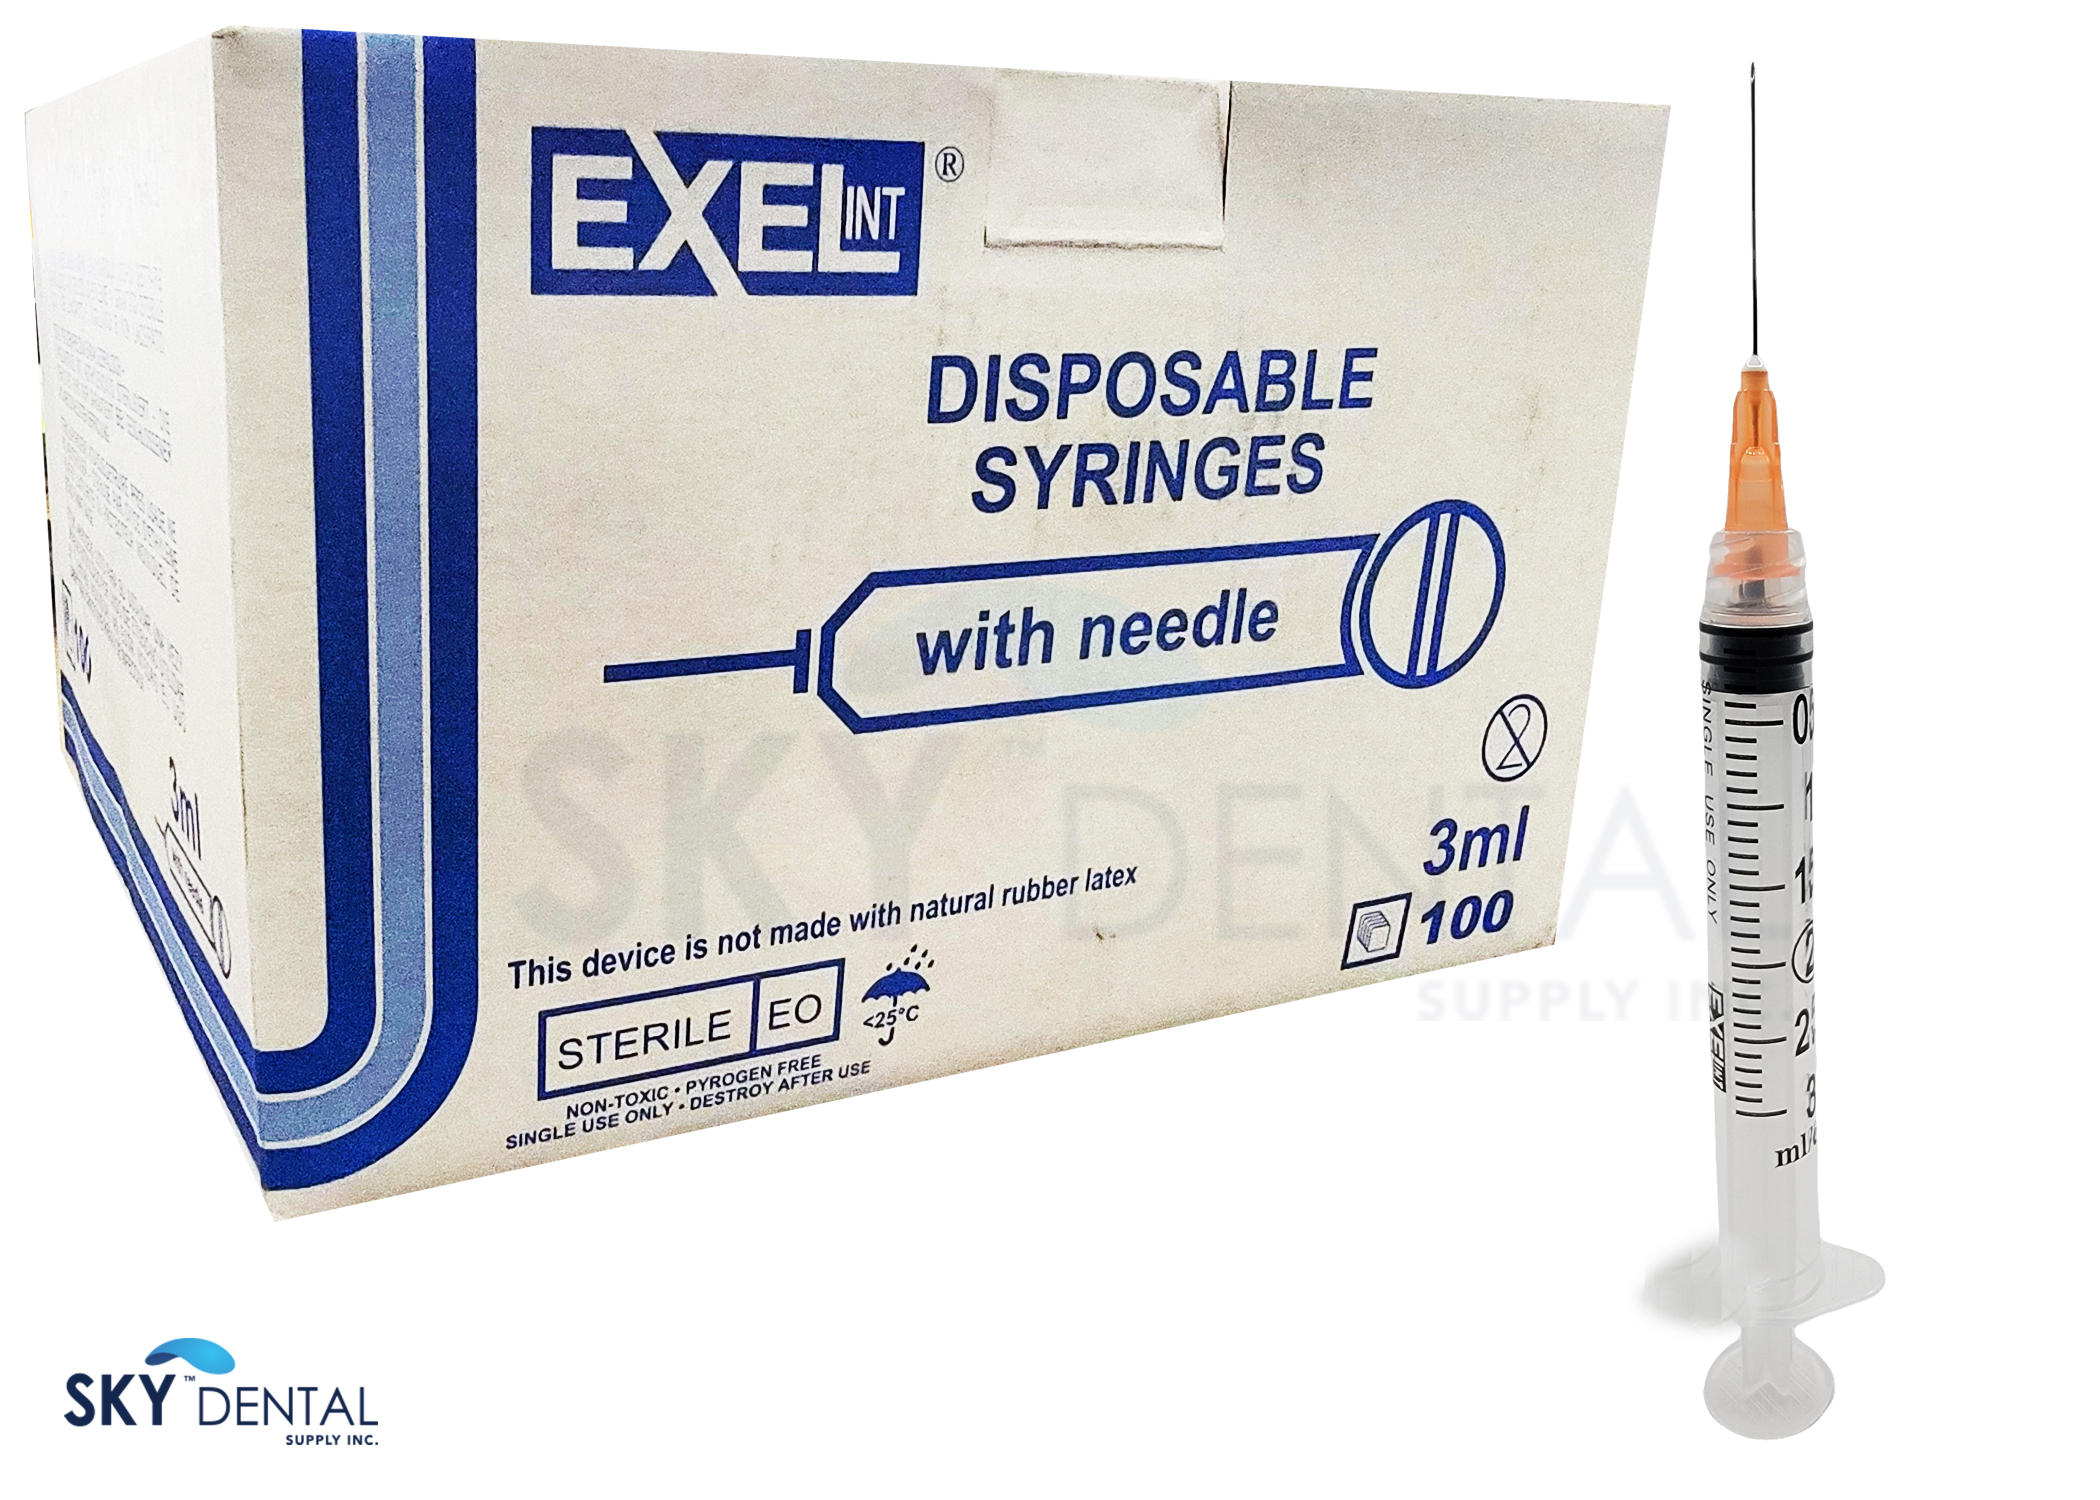 Set of 5 Empty Syringes with Caps for Glue Application